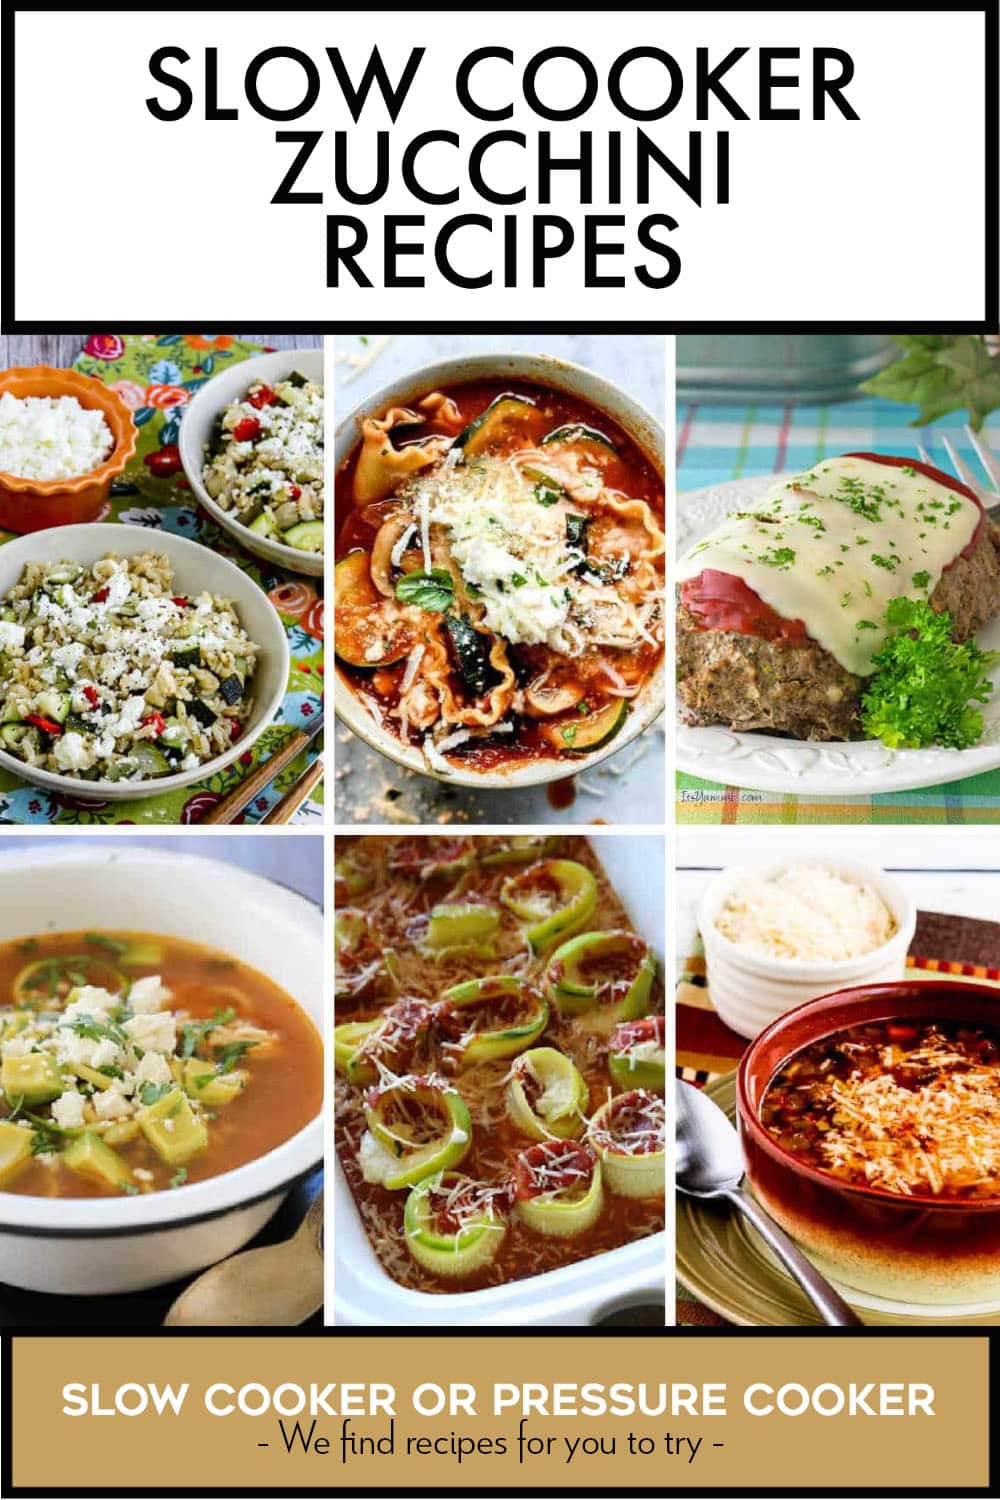 Pinterest image of Slow Cooker Zucchini Recipes